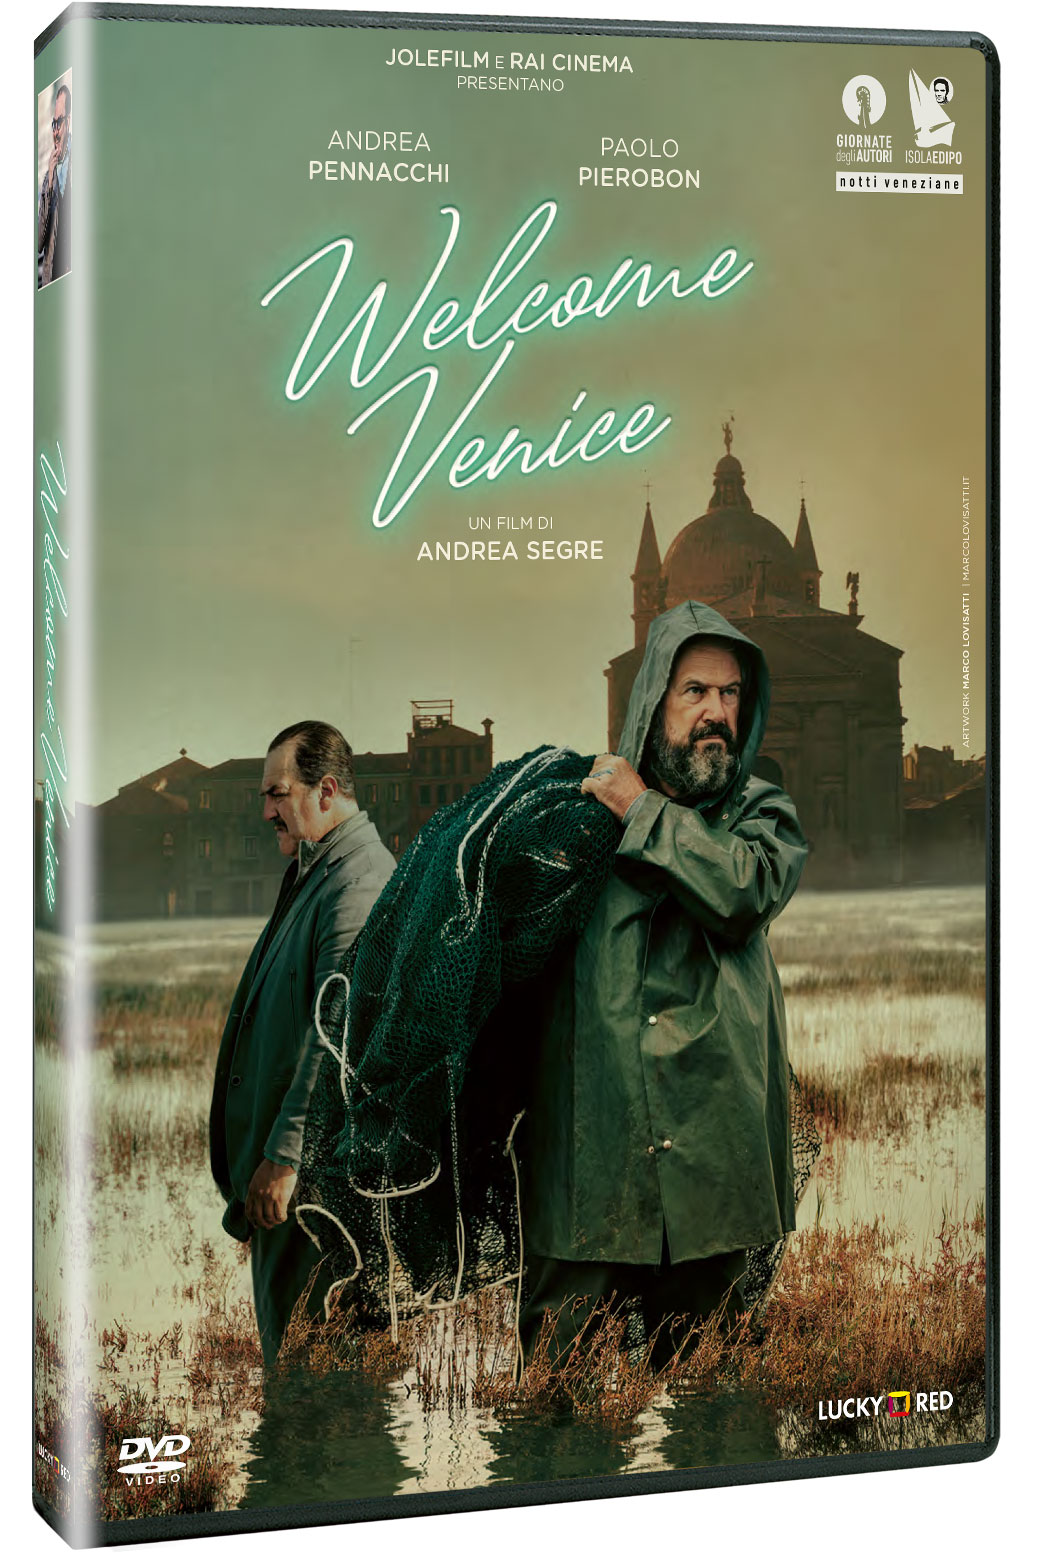 Welcome Venice in DVD